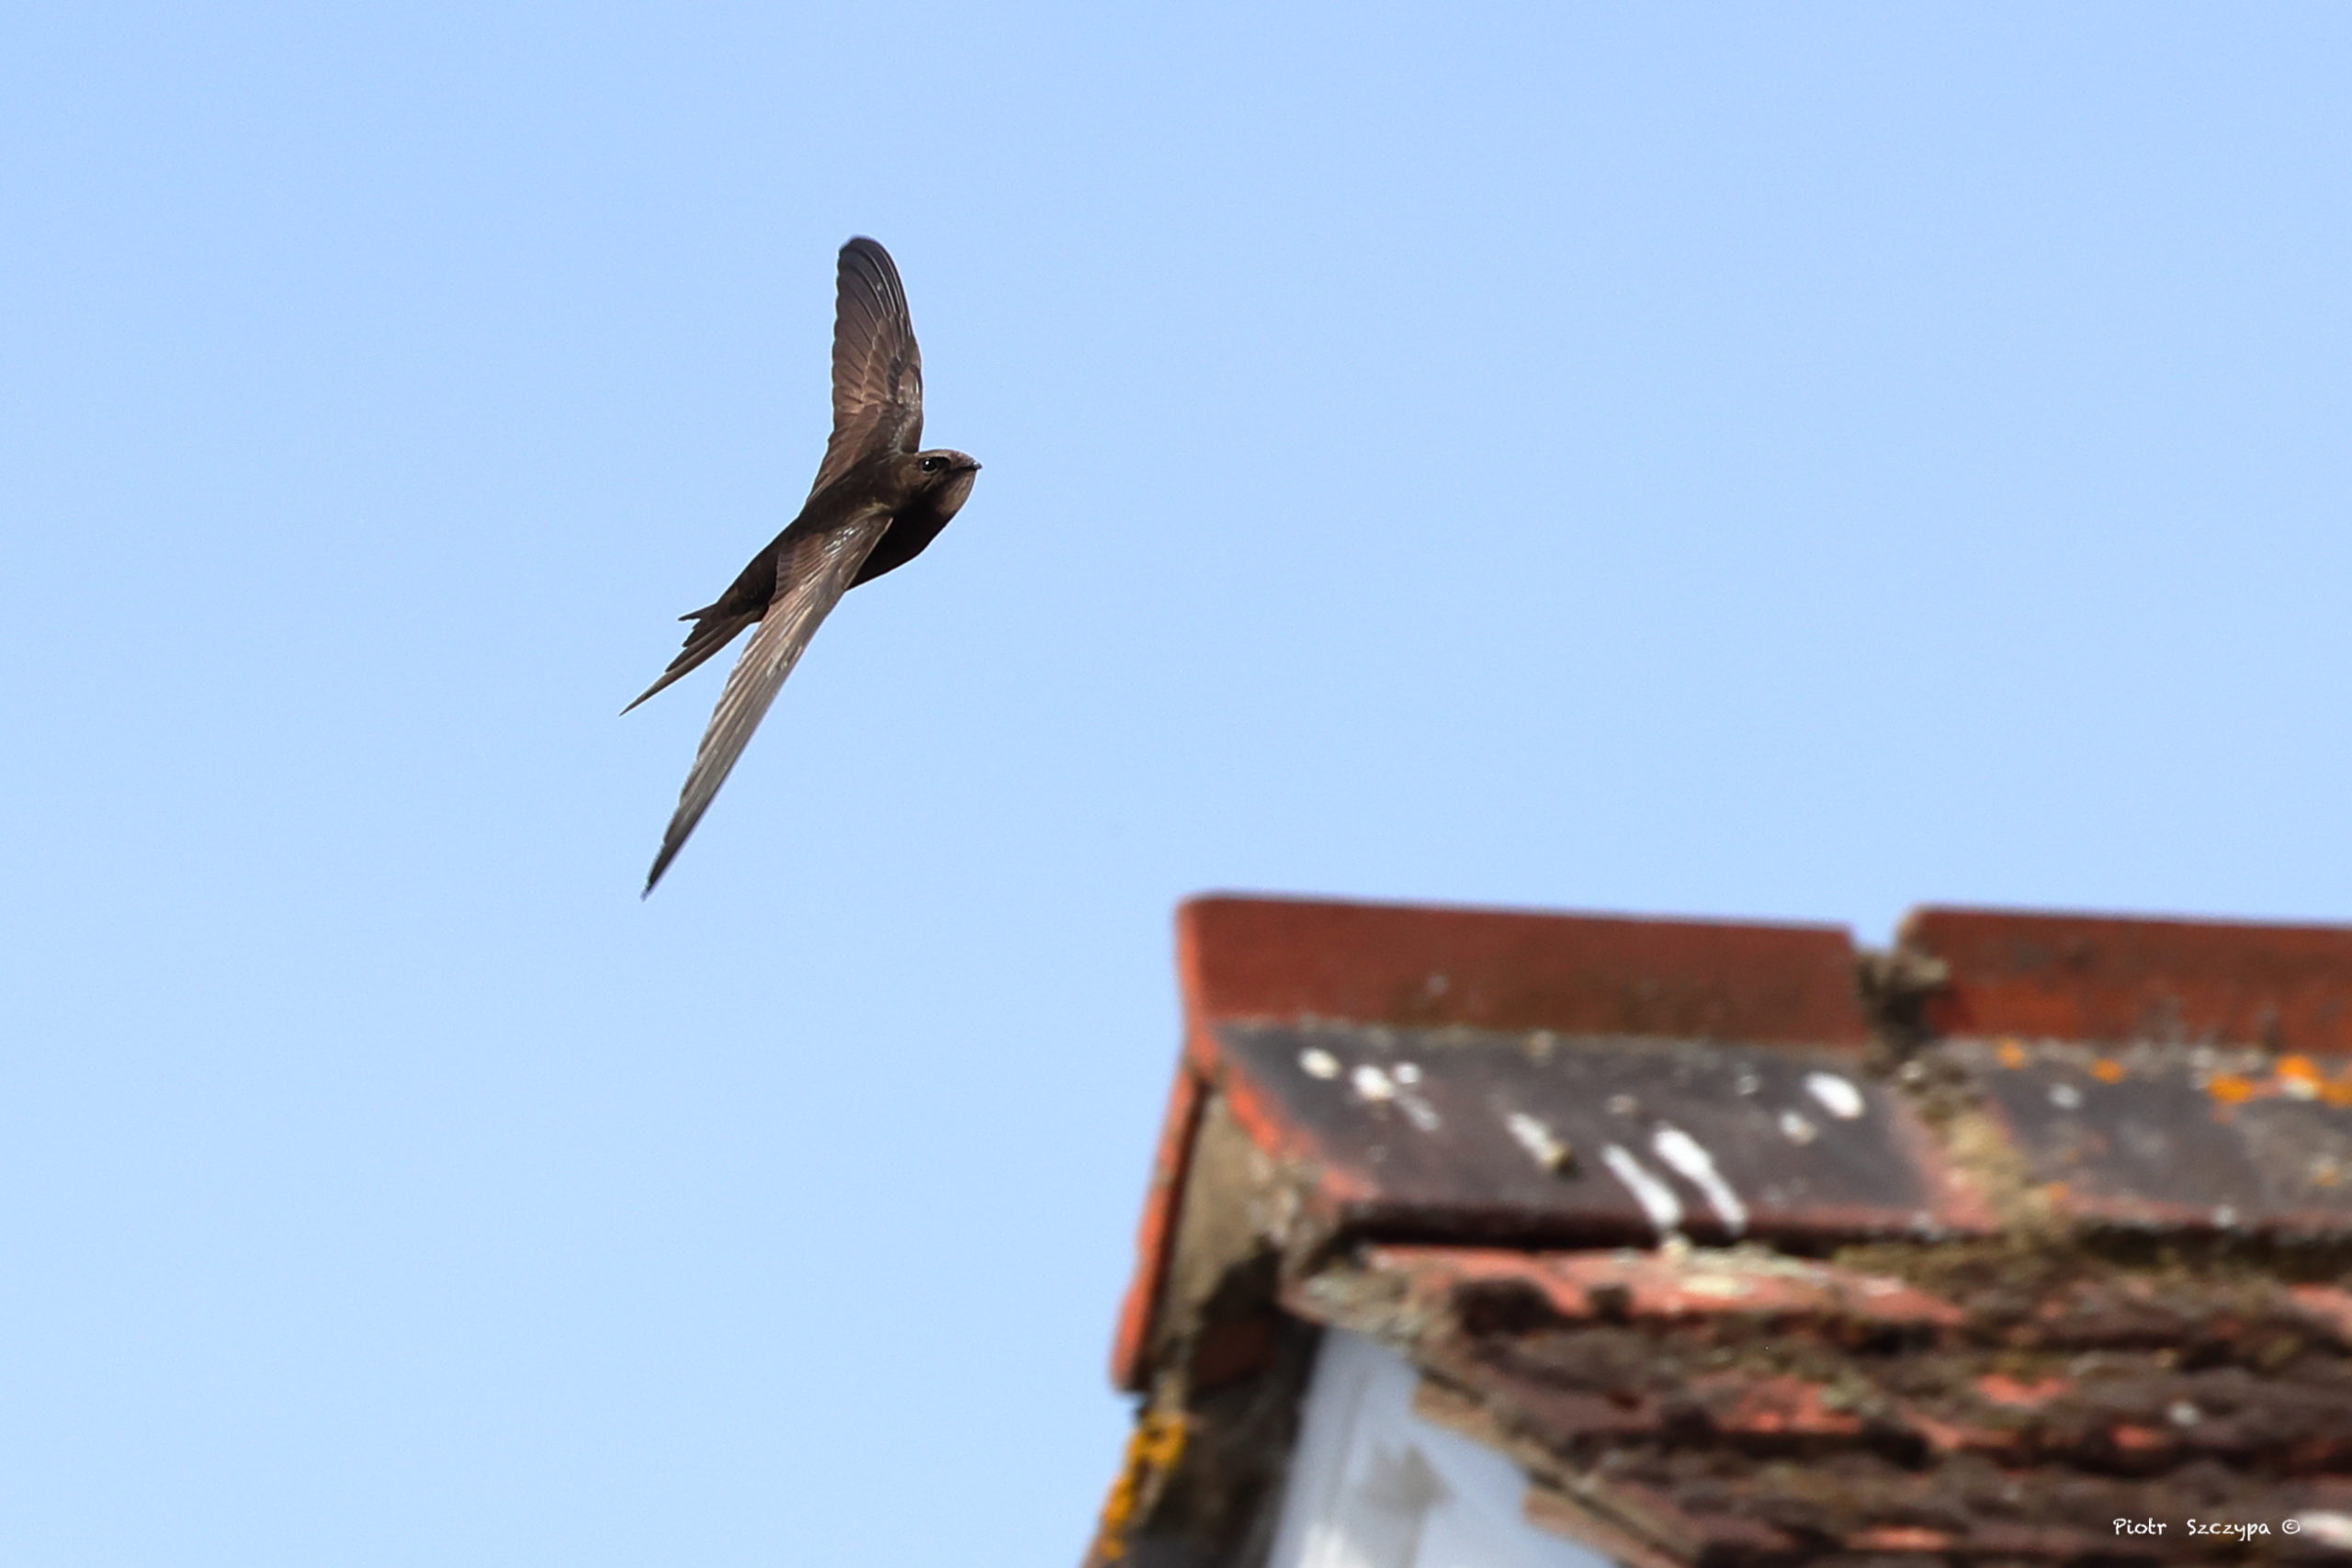 Lambeth: Supporting the swift population thrive